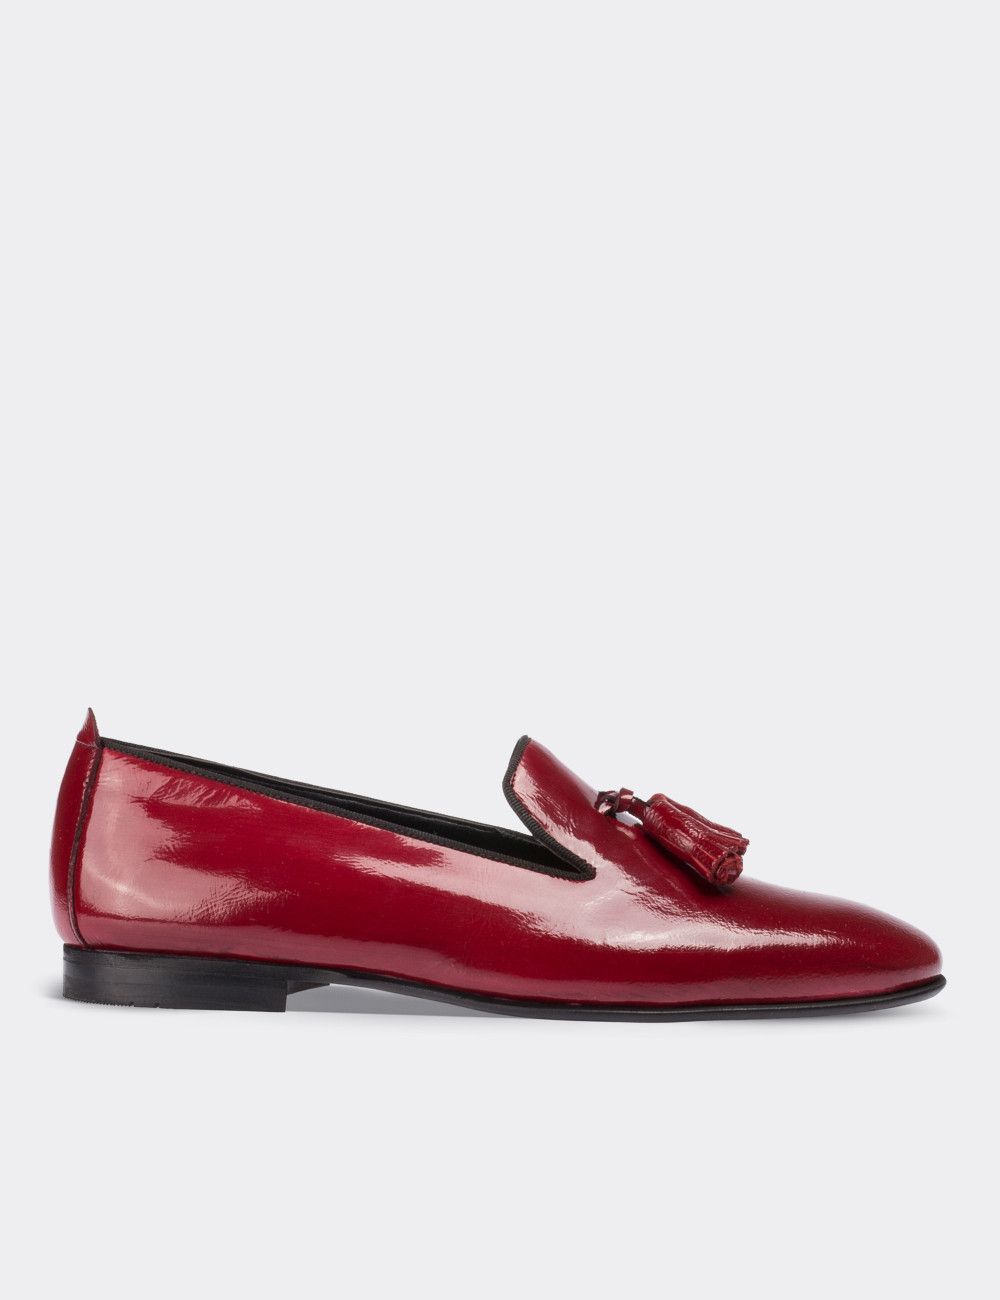 Burgundy Patent Leather Loafers - Deery